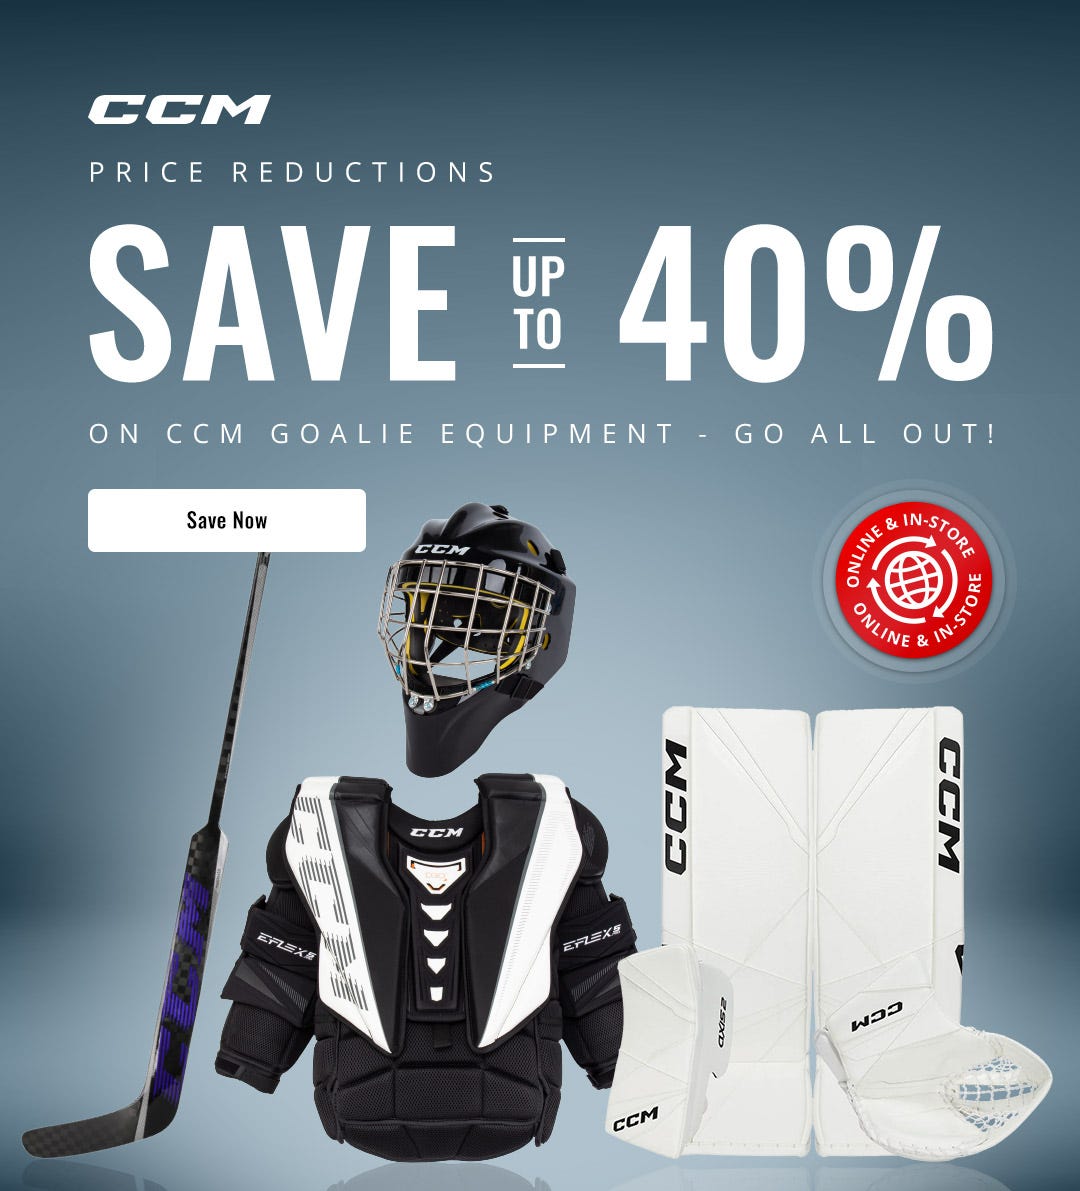 CCM Price Reductions | Save up to 40% on CCM Axis 2 & Extreme Flex 5